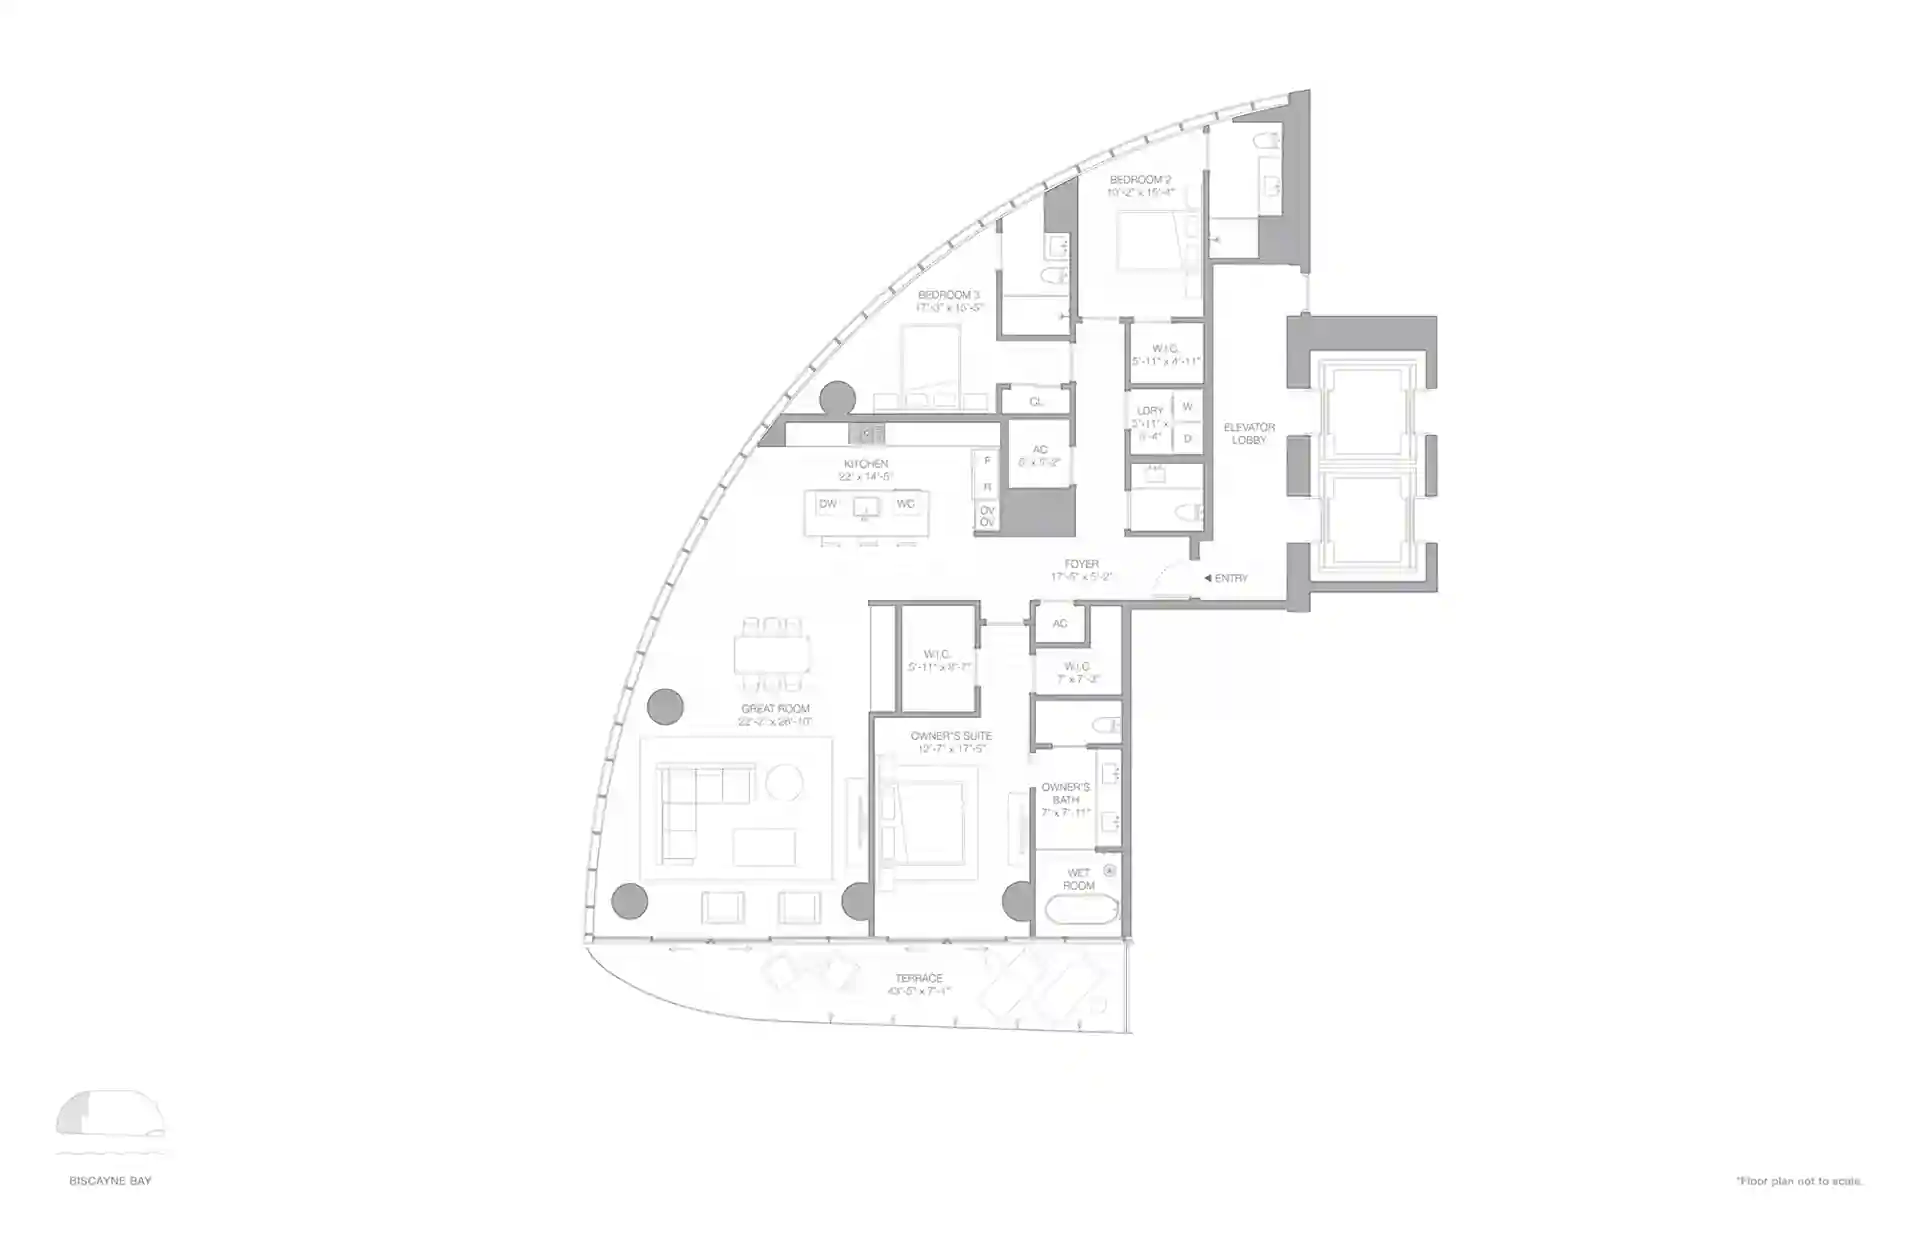 Blueprint map of the residence area